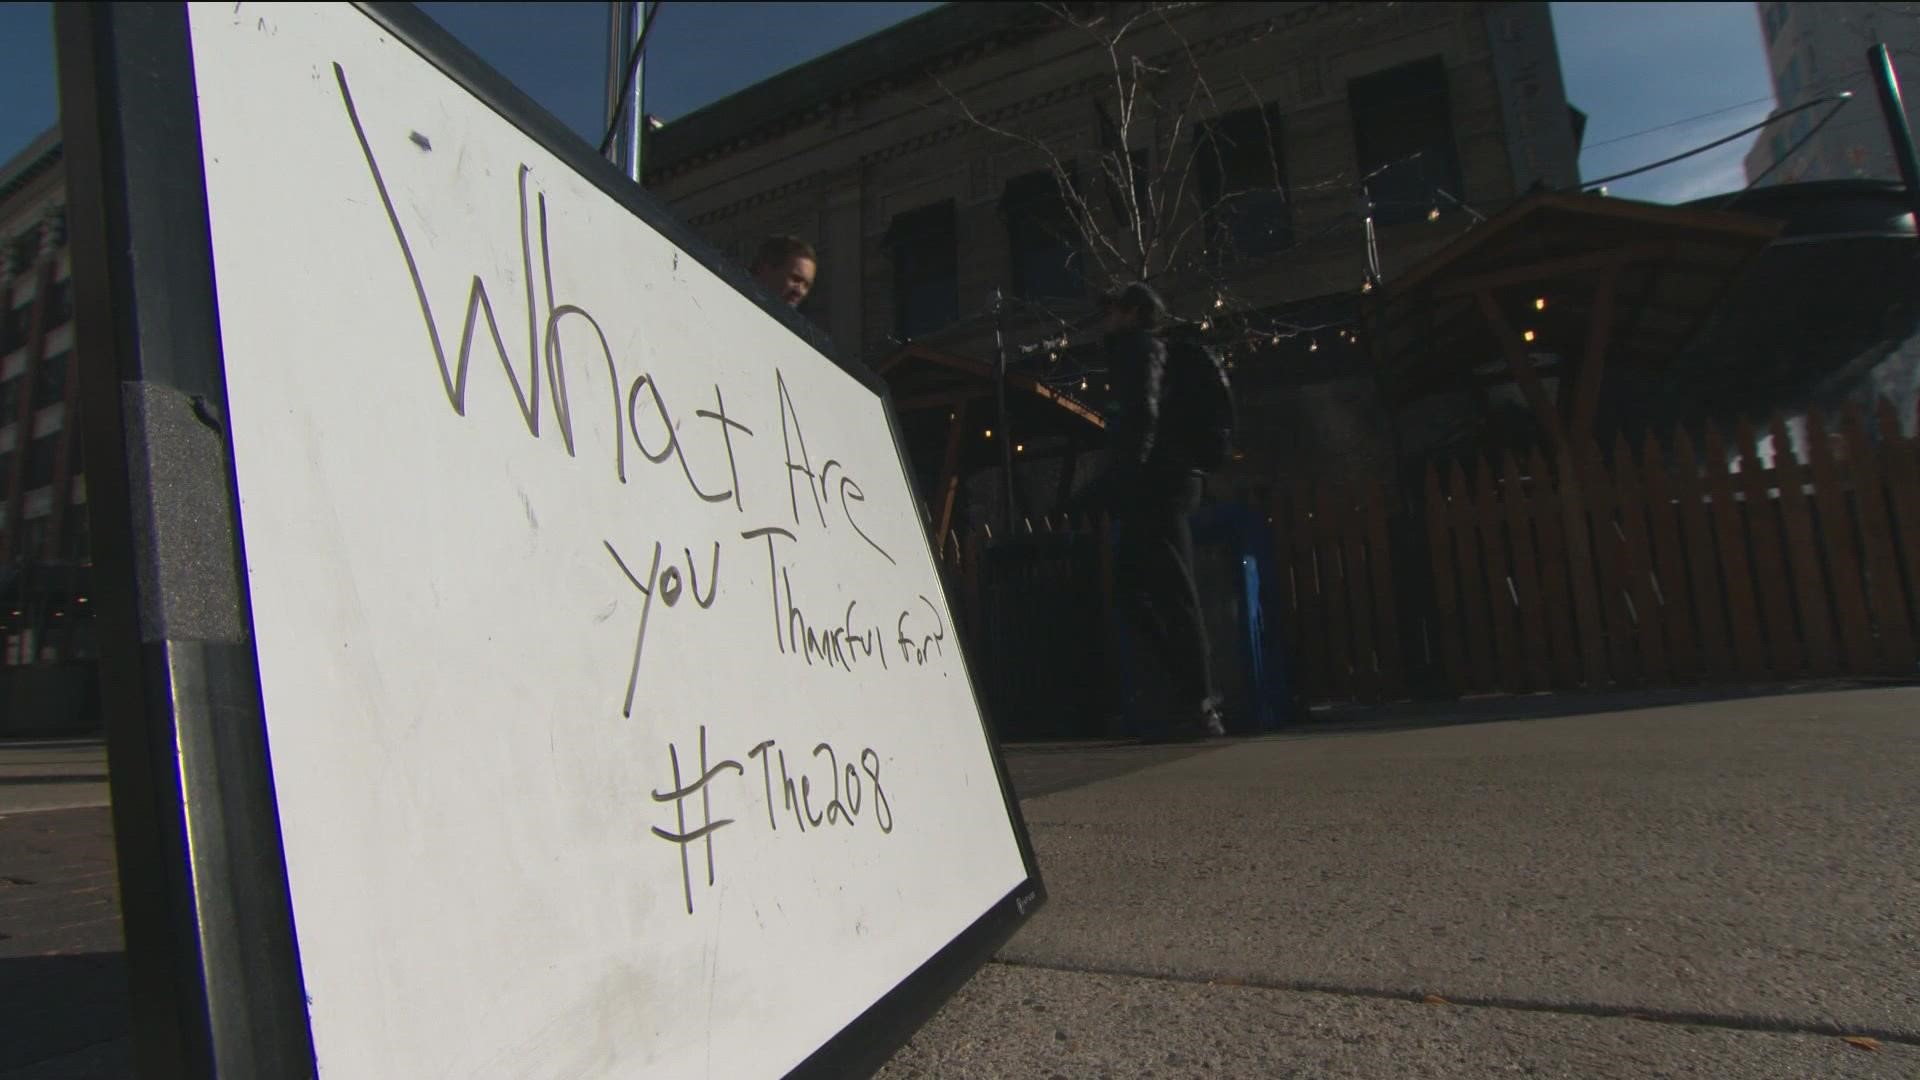 The 208 asks people in downtown Boise what they're thankful for this holiday